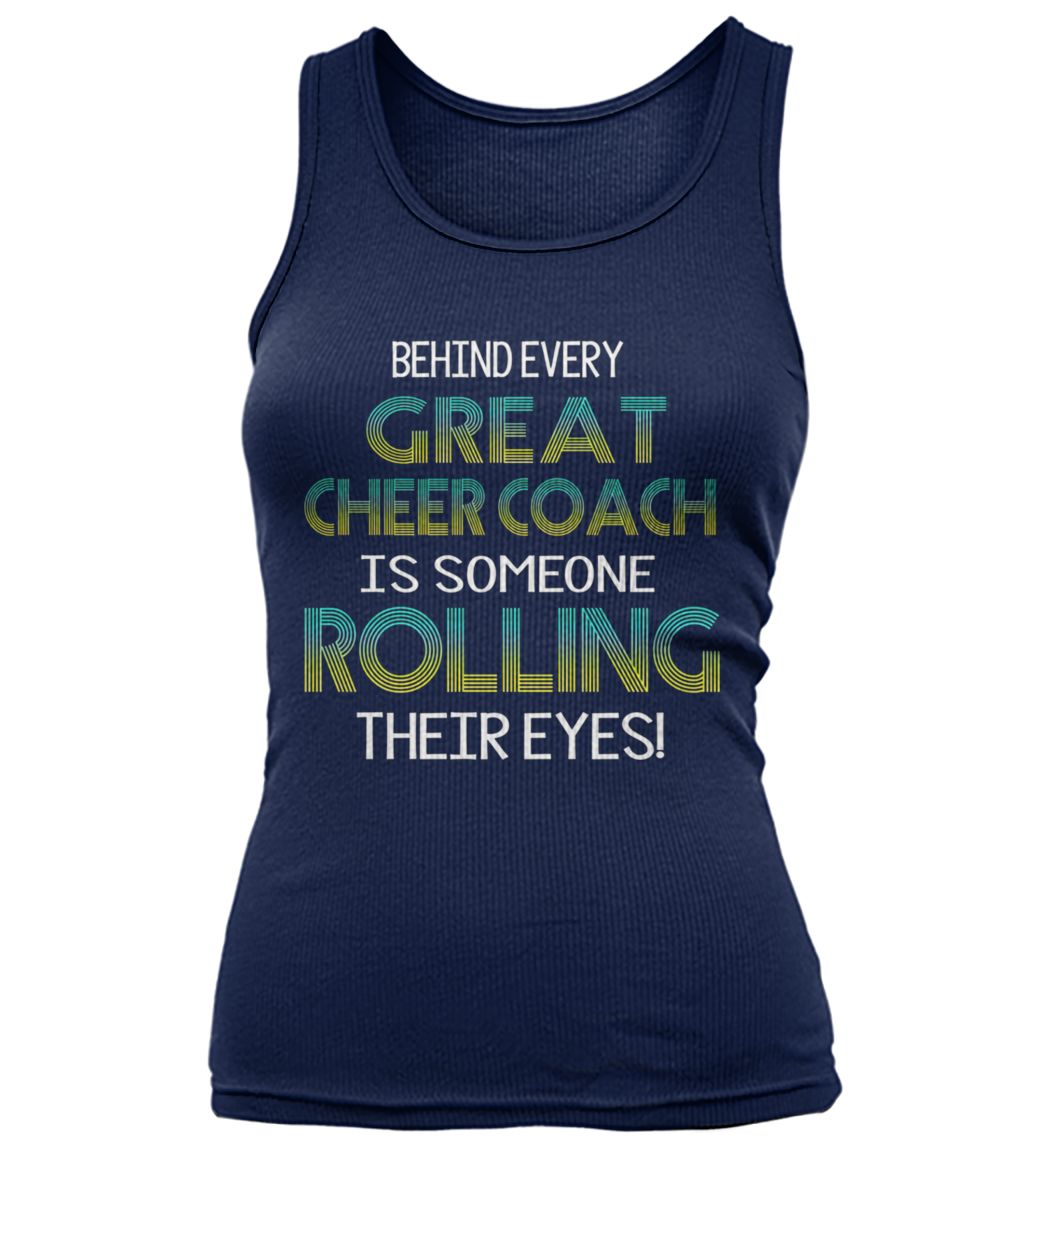 Behind every great cheer coach is someone rolling their eyes women's tank top